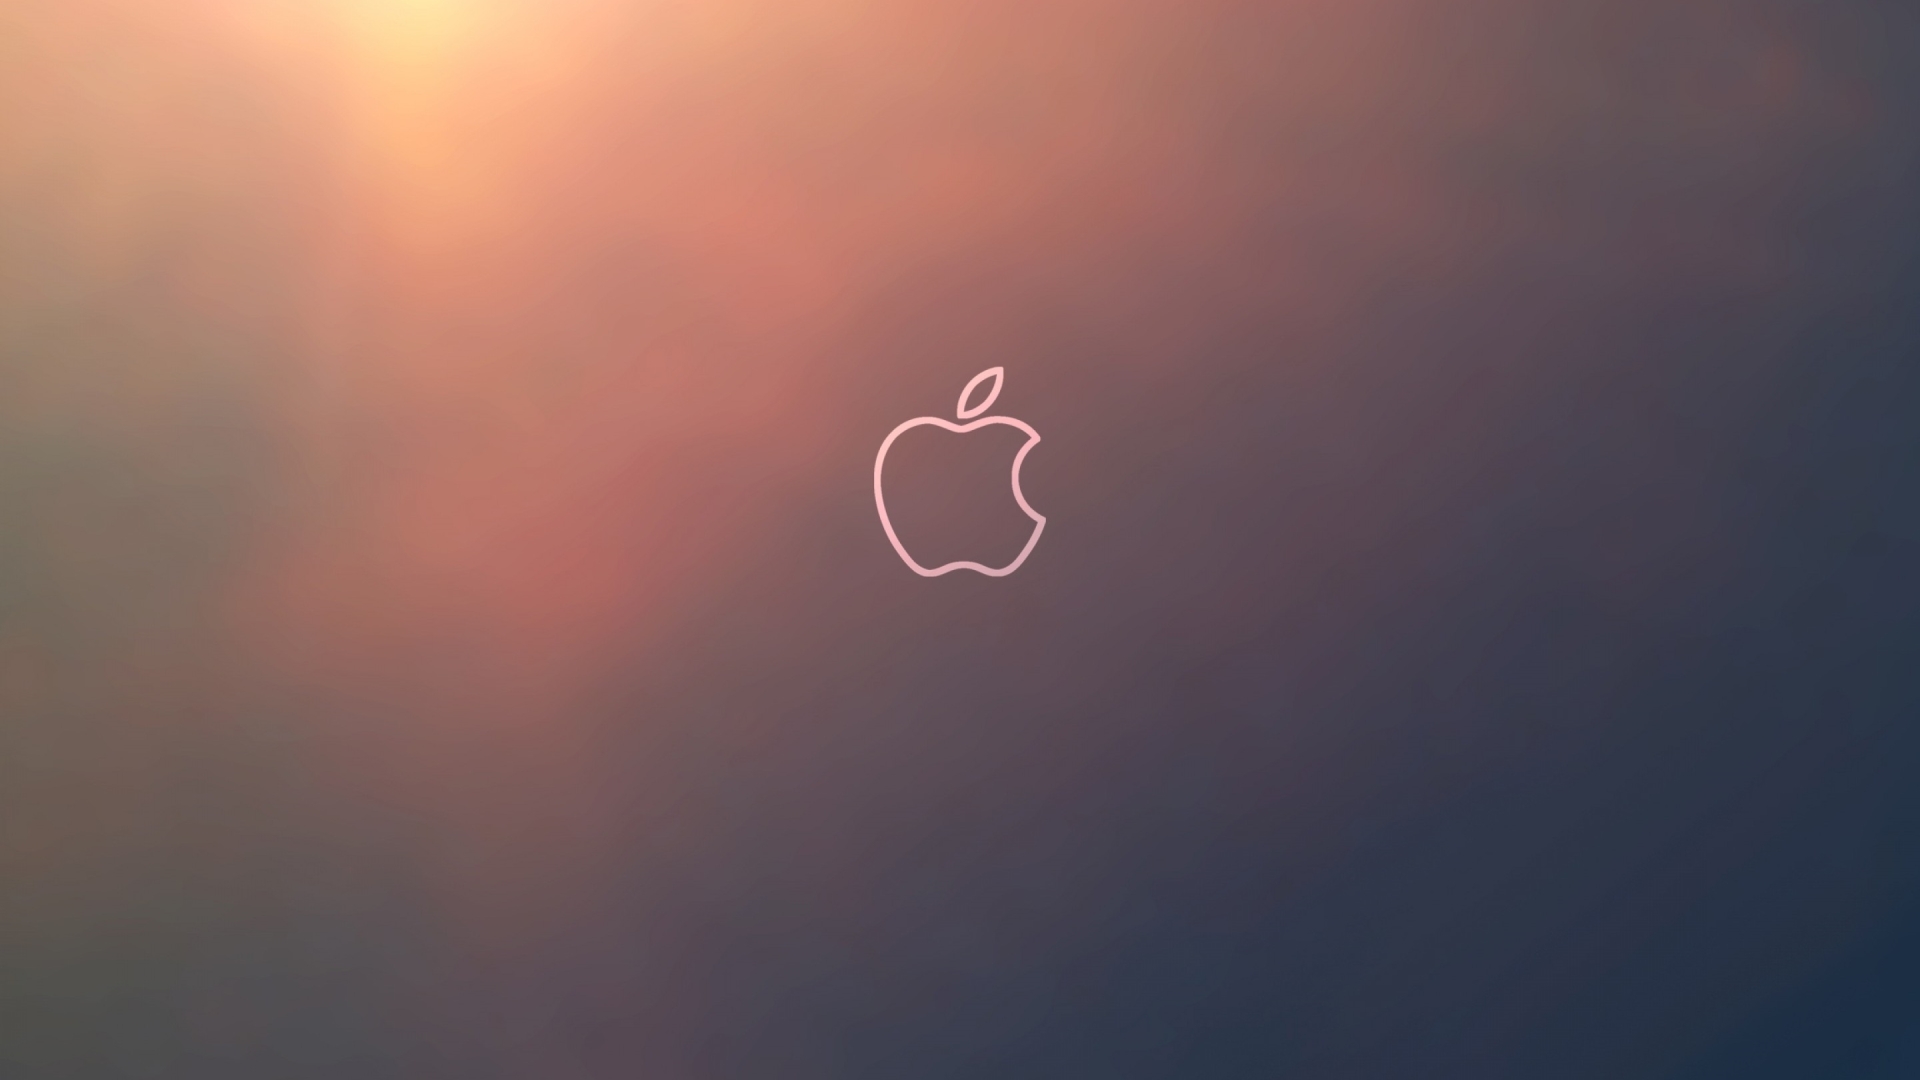 Hd Wallpapers For Mac